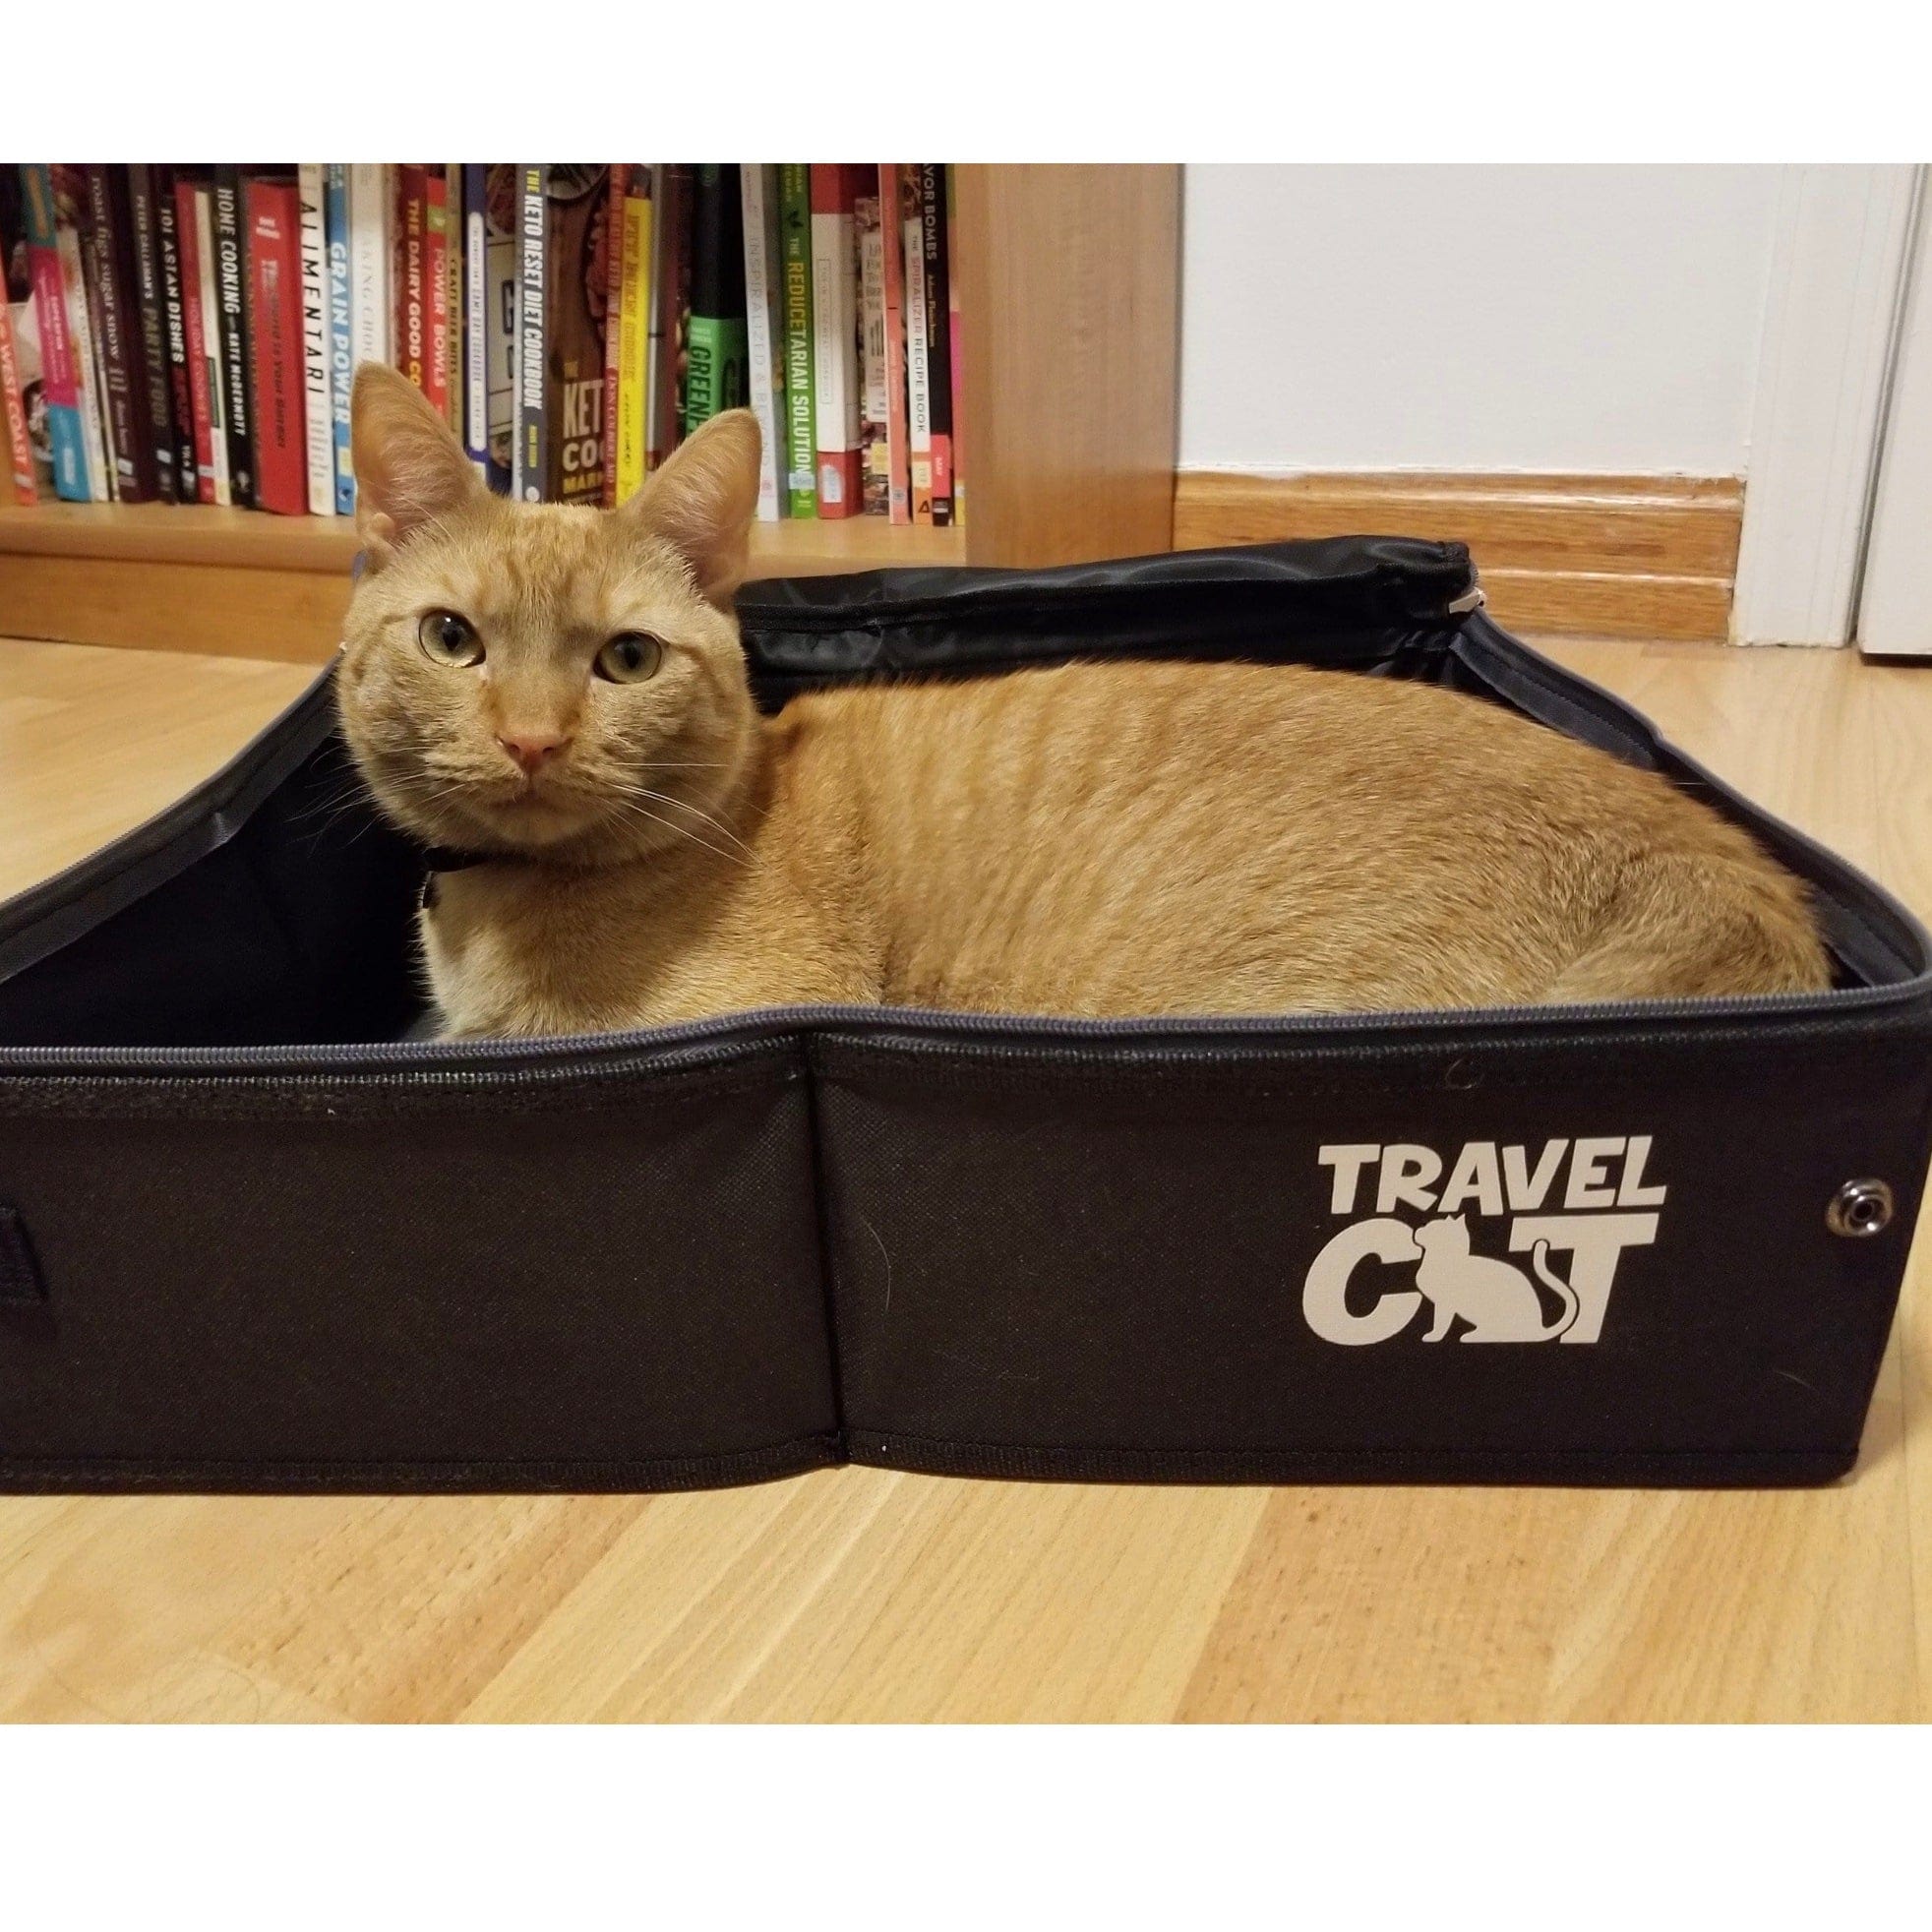 Image of "The Porta-Pawty" Travel Litter Box - Portable Bathroom for Cats